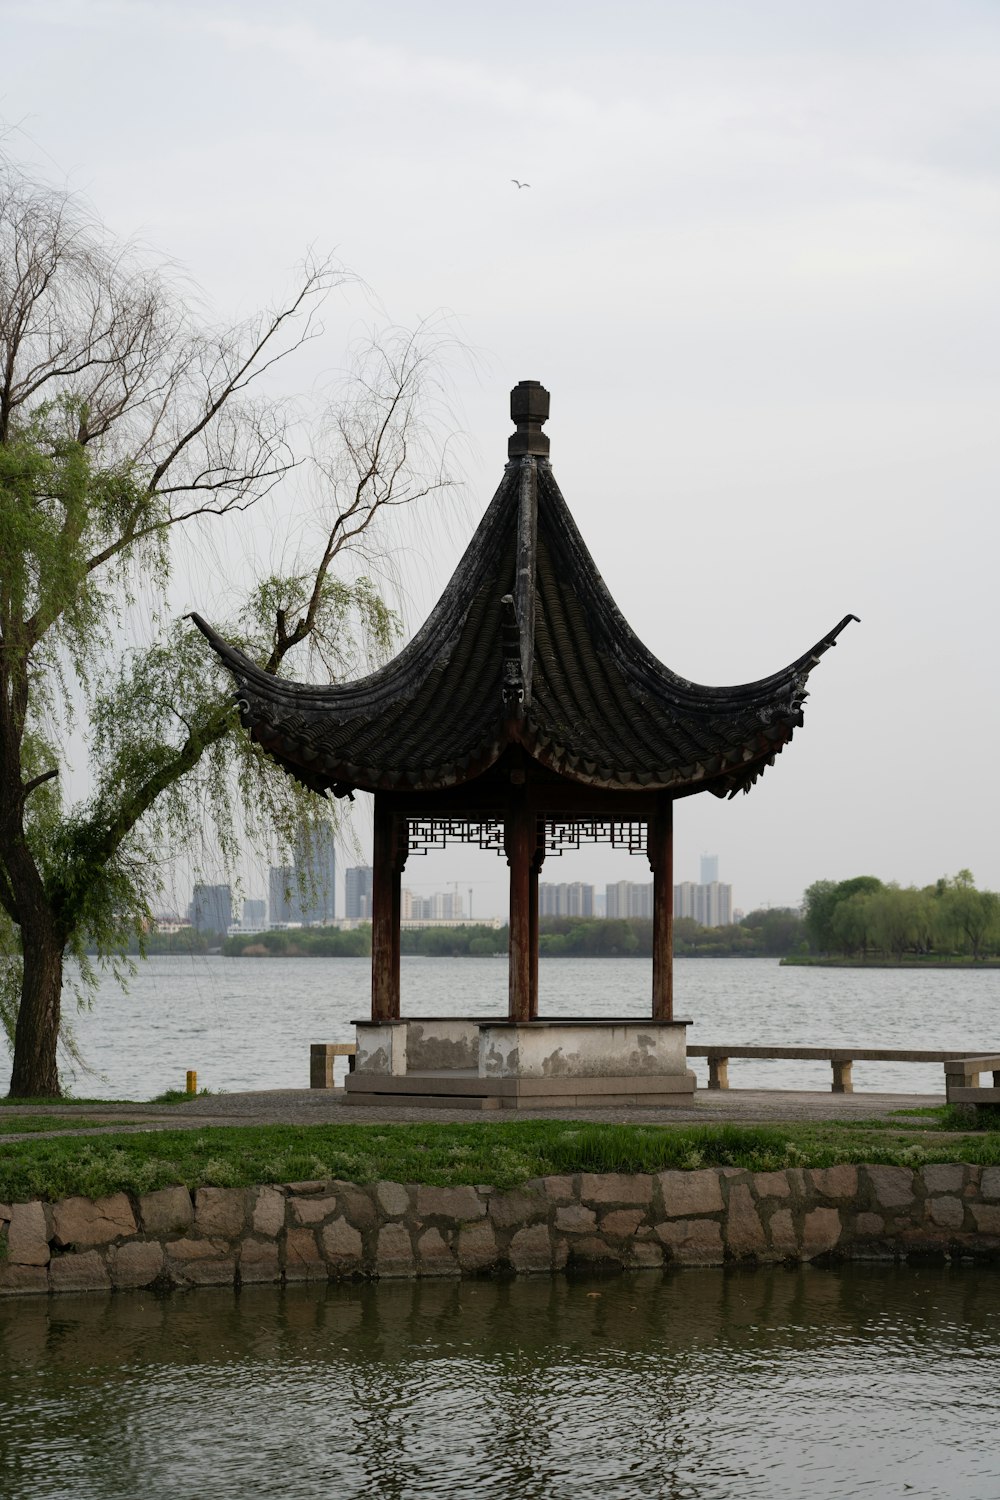 a gazebo in a park next to a body of water